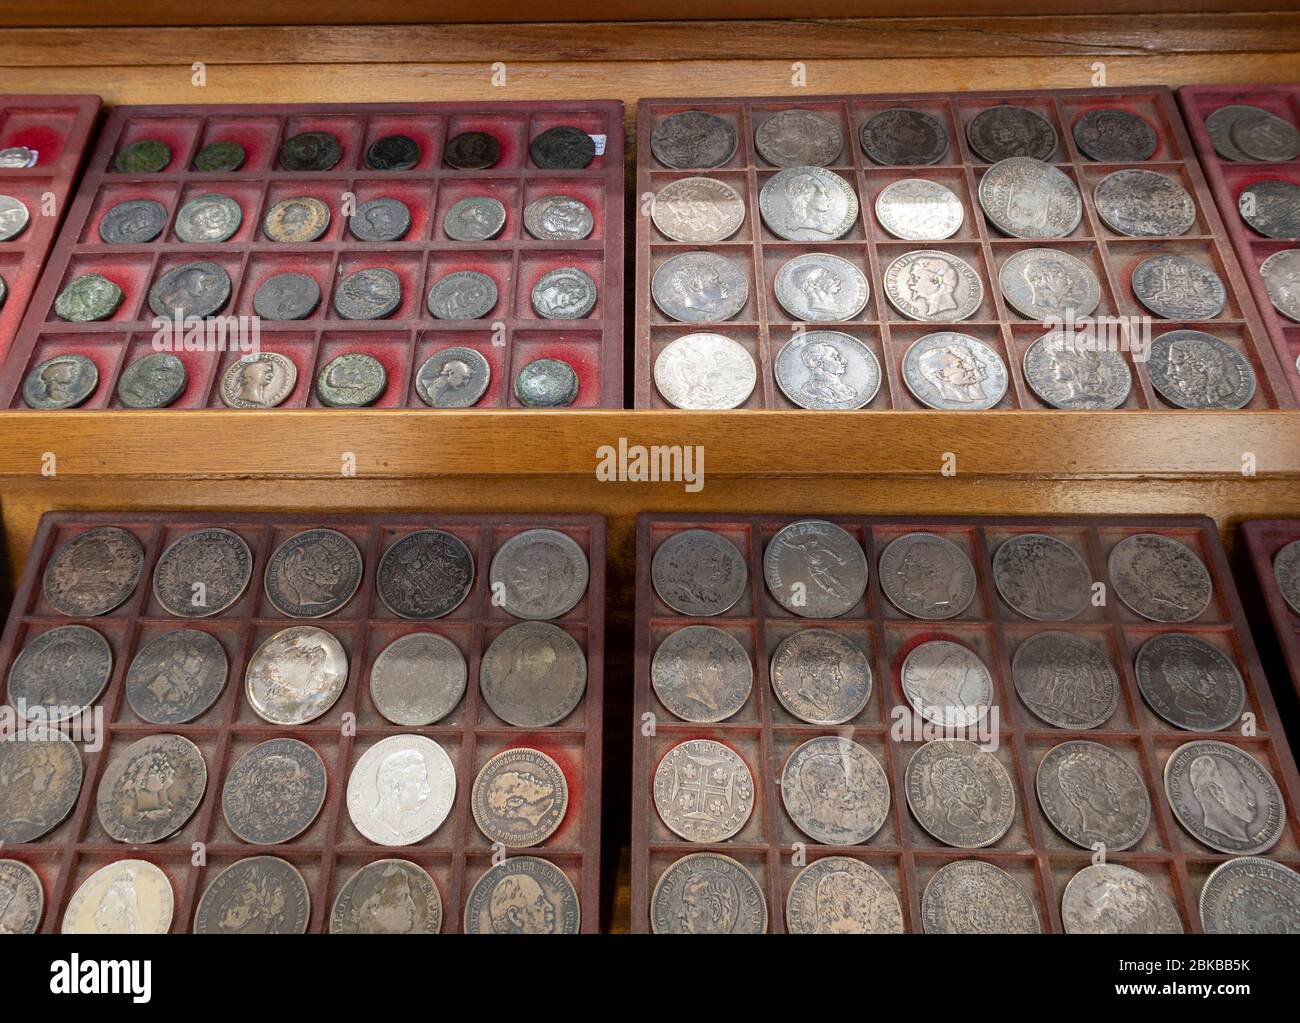 8 Coin Holders for Your Collection  Coin collecting, Coins collecting  storage, Coin holder